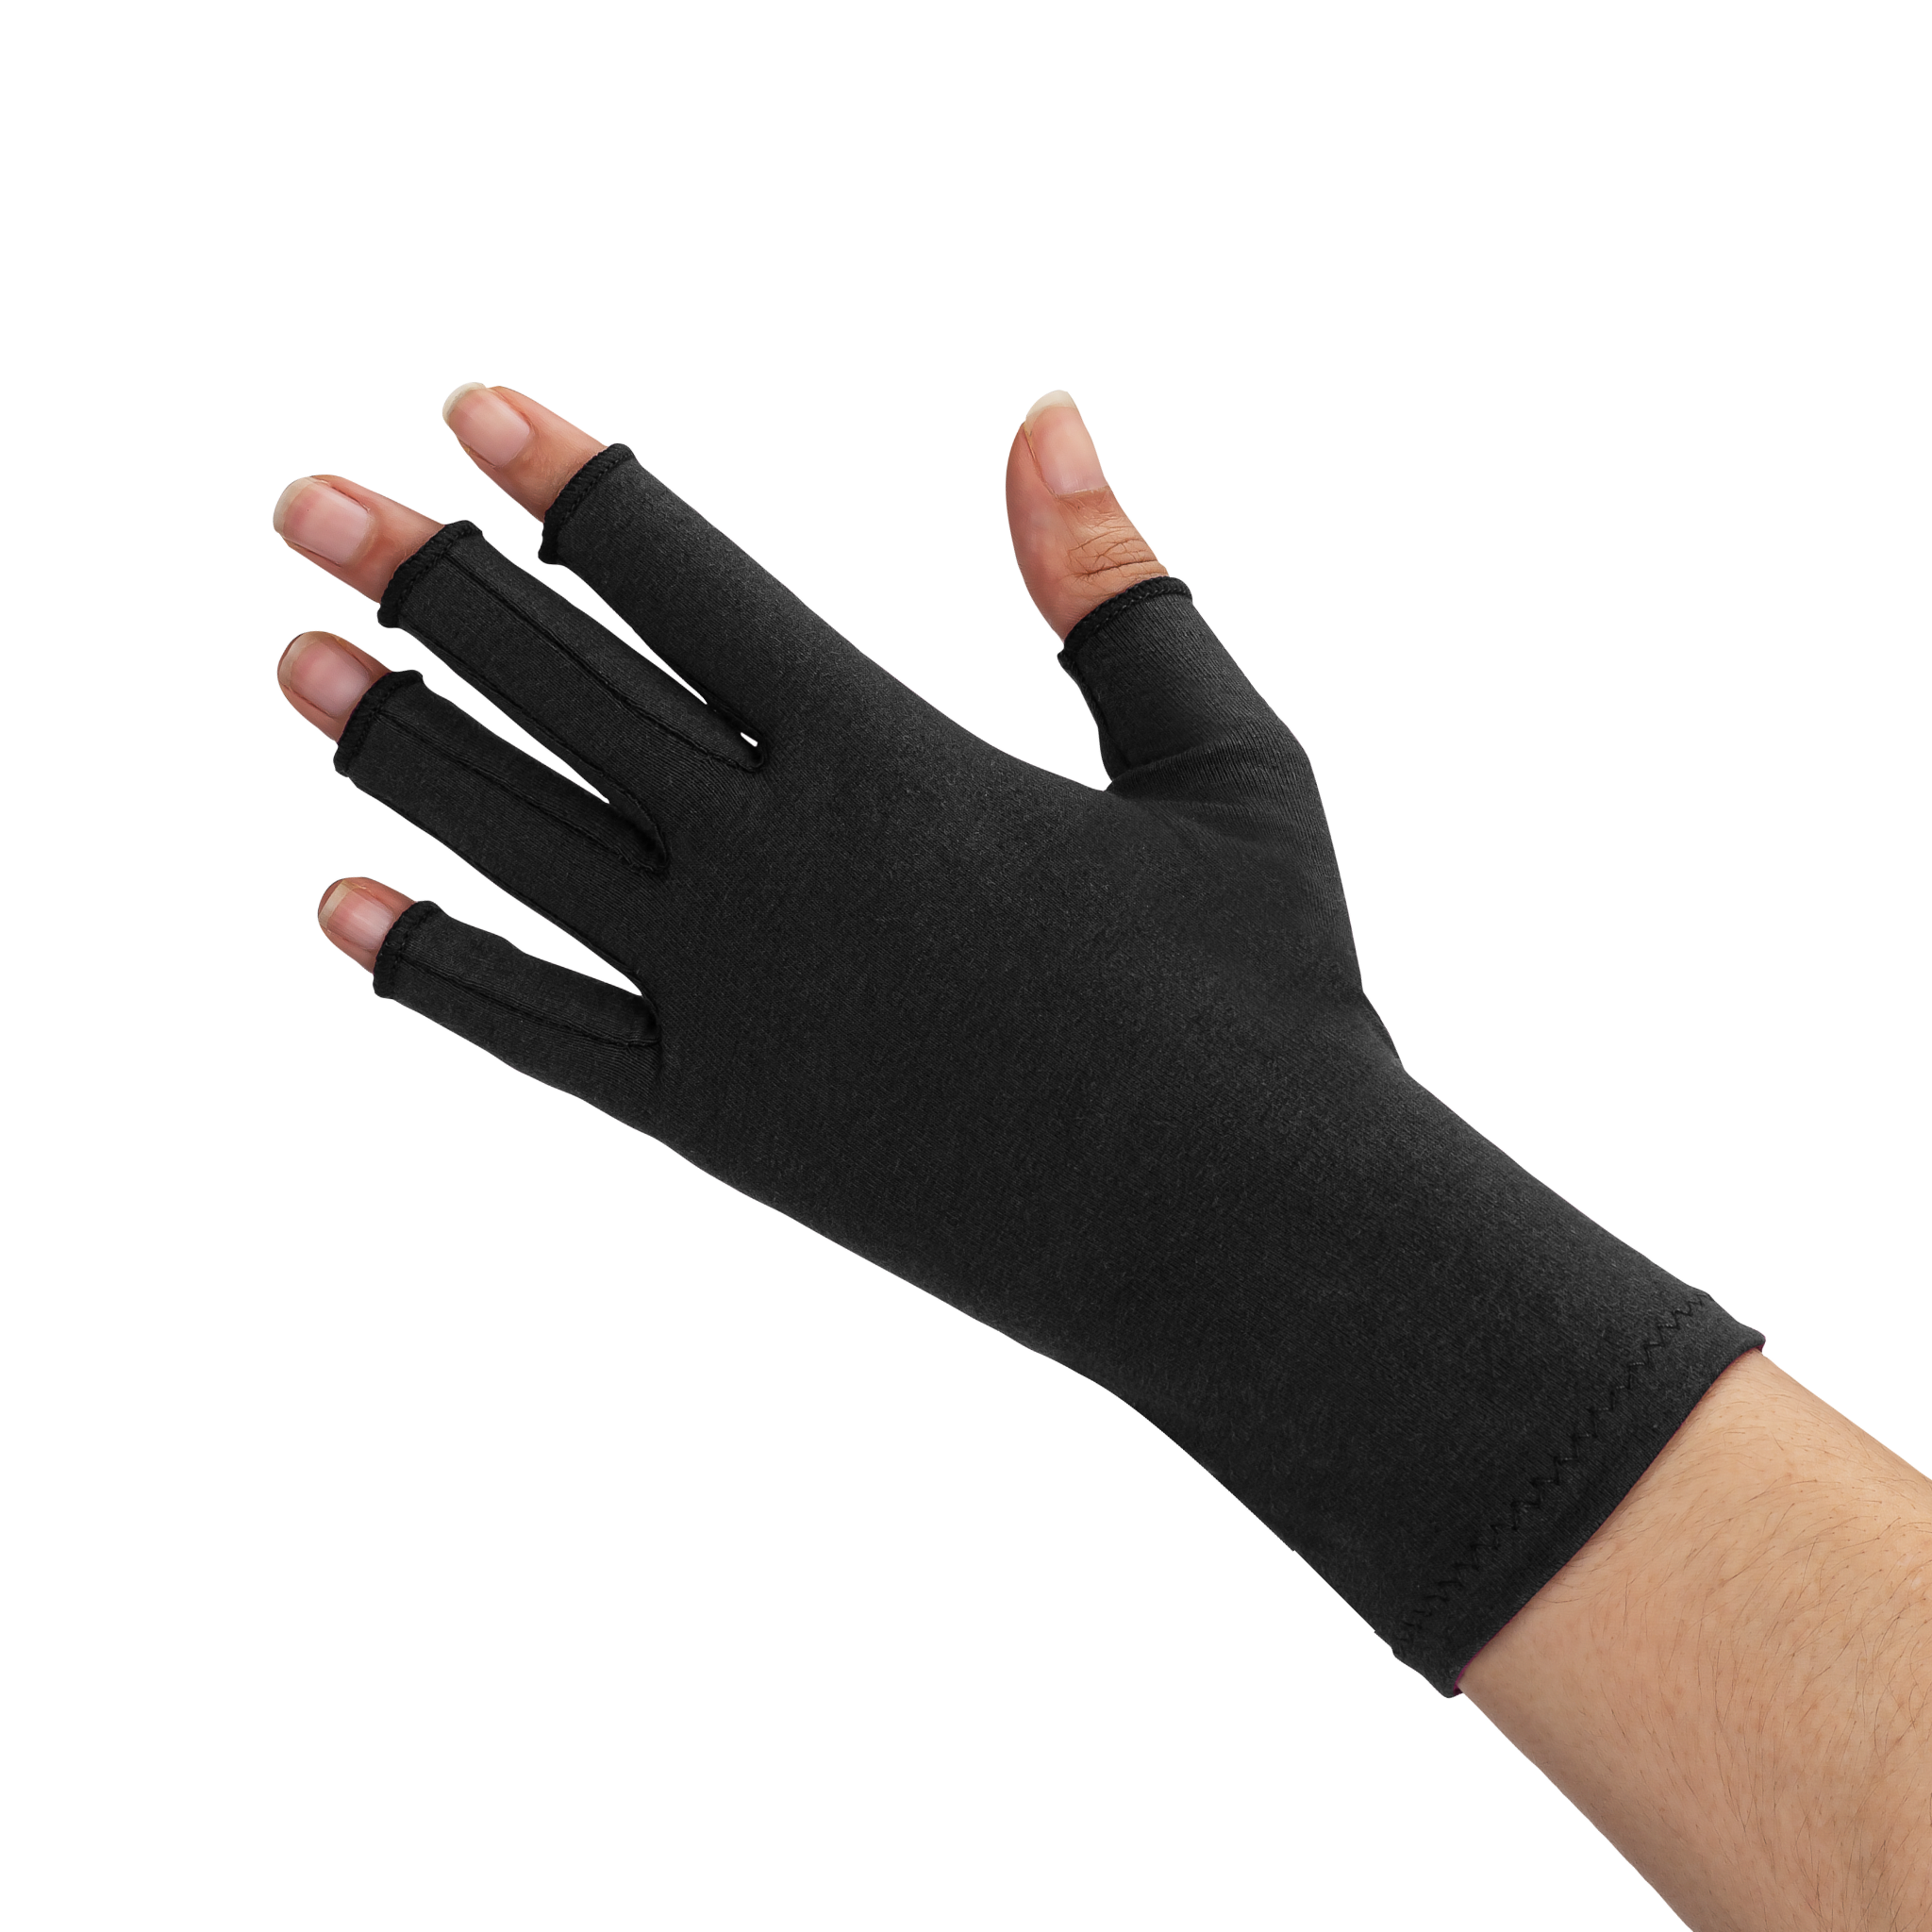 A close up of the hand of a woman with arthritis, wearing Classic Black Compression Gloves and showing the back of her hand.